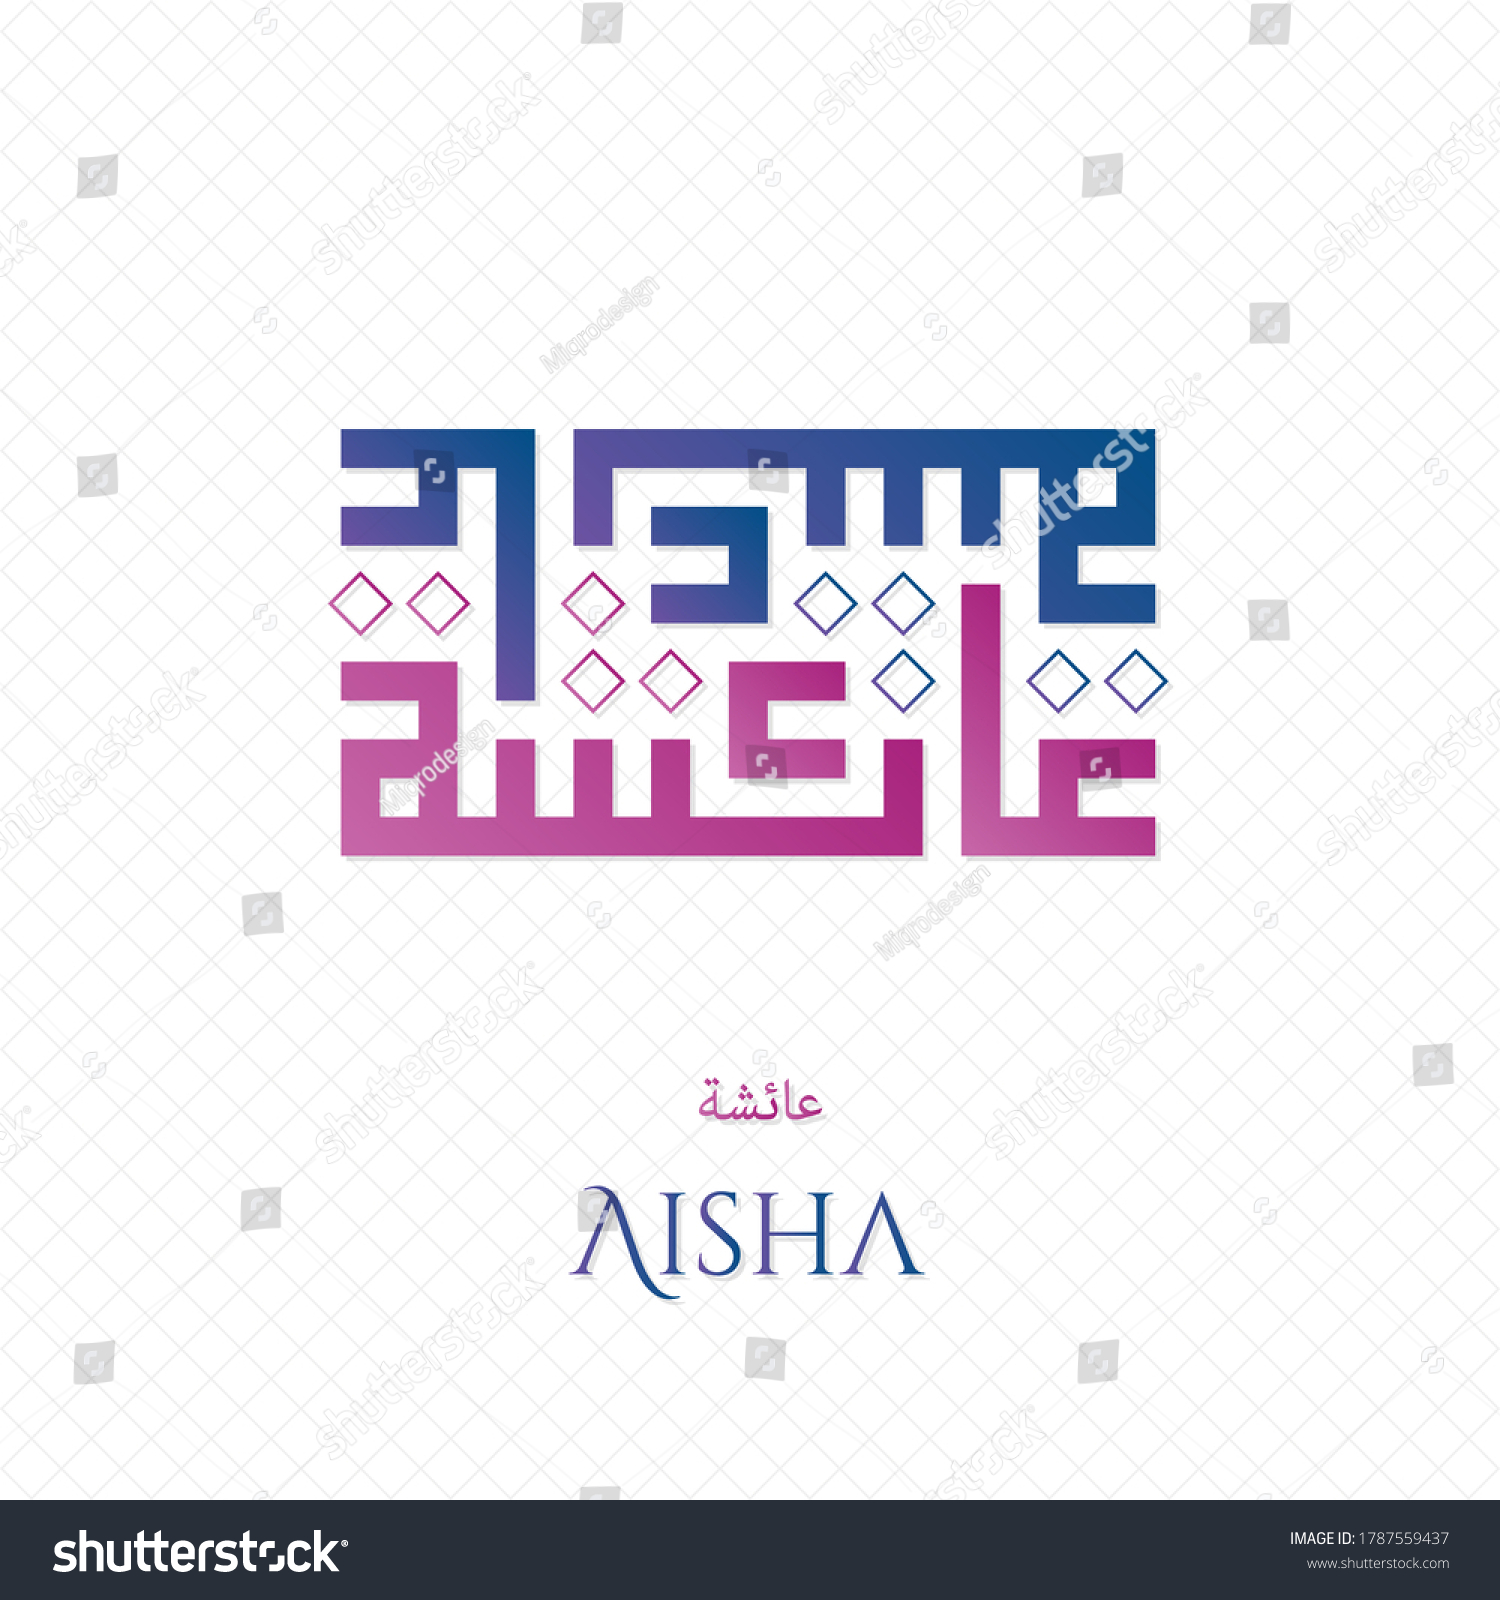 SVG of Arabic Kufi Calligraphy Vector Aisha Name With Square Pattern svg